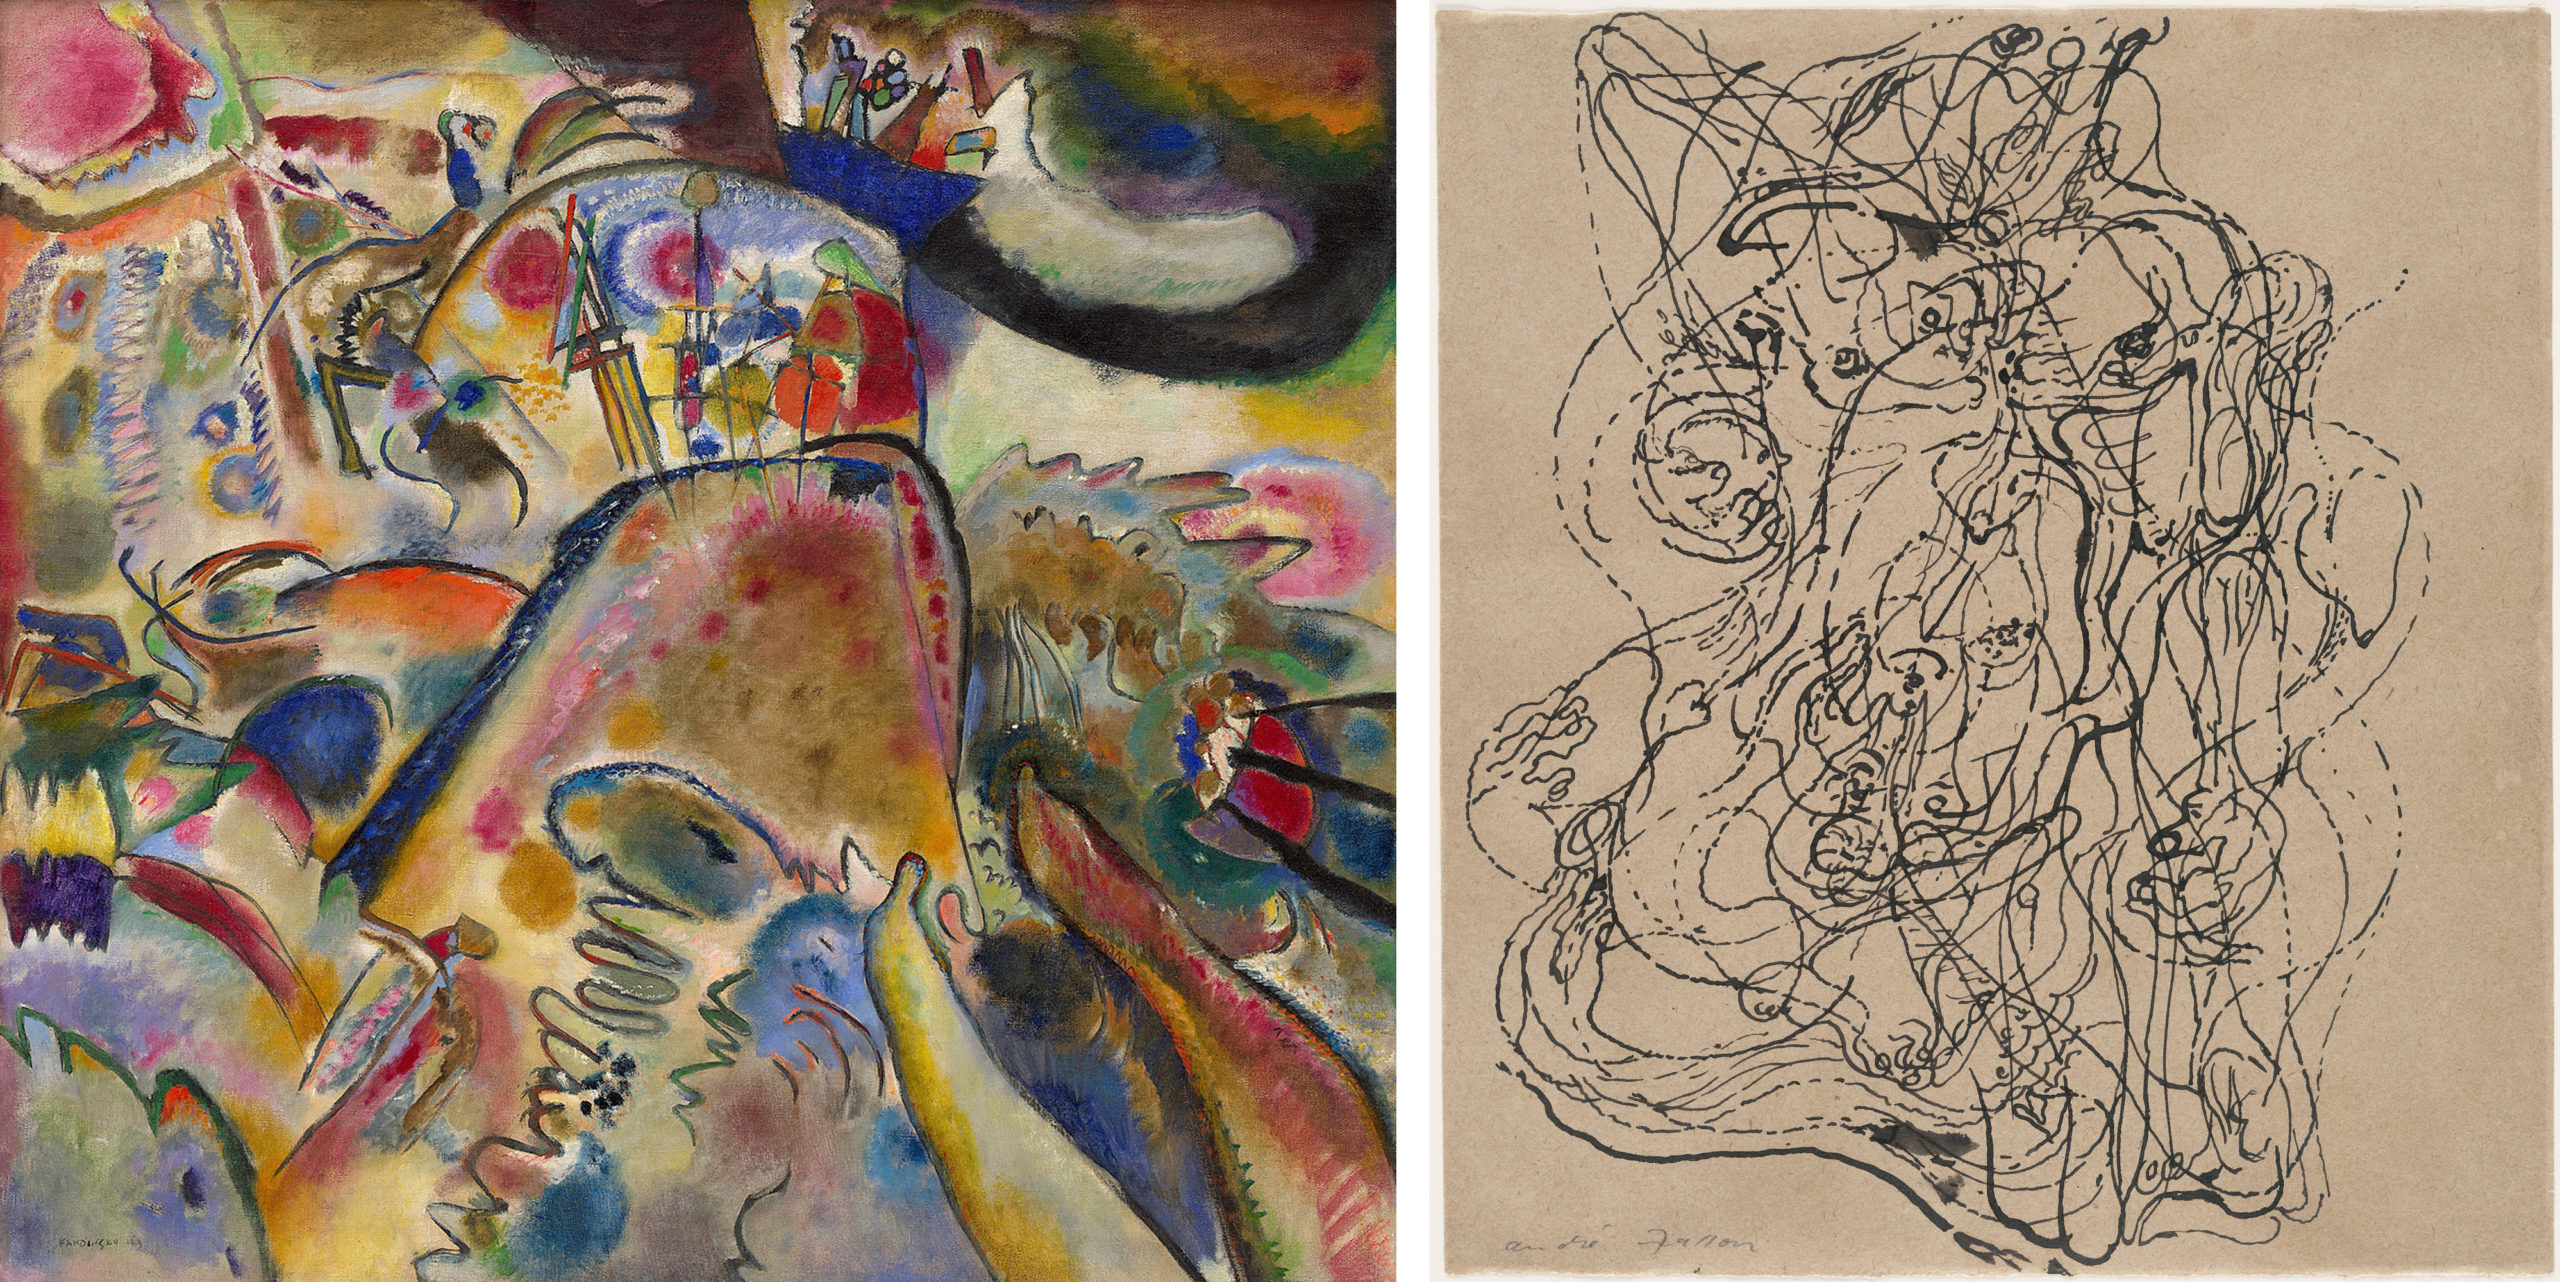 Left: Vasily Kandinsky, Small Pleasures, 1913, oil on canvas, 110.2 x 119.4 cm (Solomon R. Guggenheim Museum, New York); Right: André Masson, Automatic Drawing, 1924, ink on paper, 23.5 x 20.6 cm (MoMA)